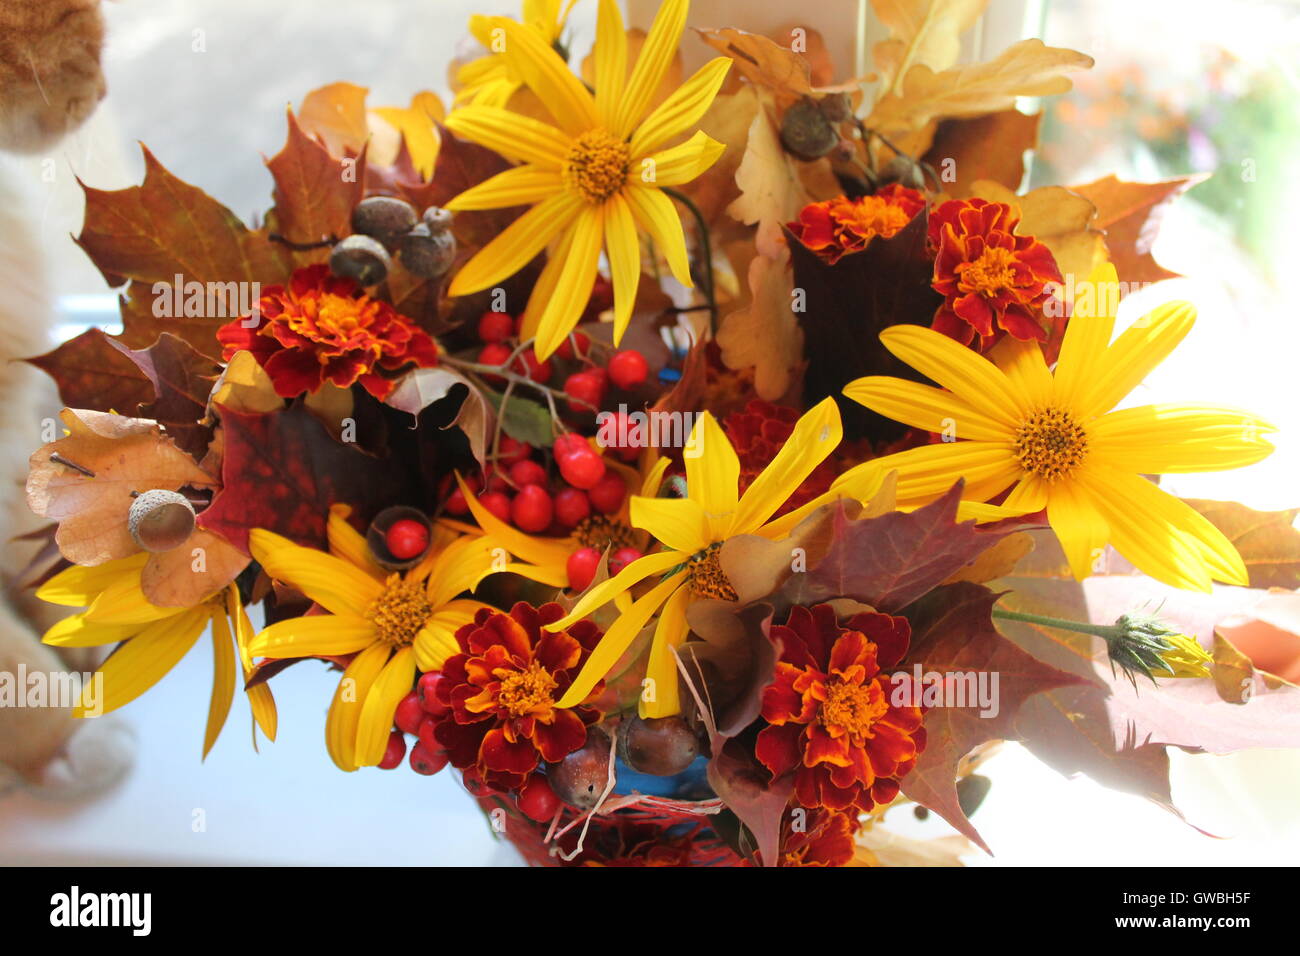 bright colorful autumn bouquet from bloom yellow flowers, berries, ginger leaves nice composition for decor Stock Photo